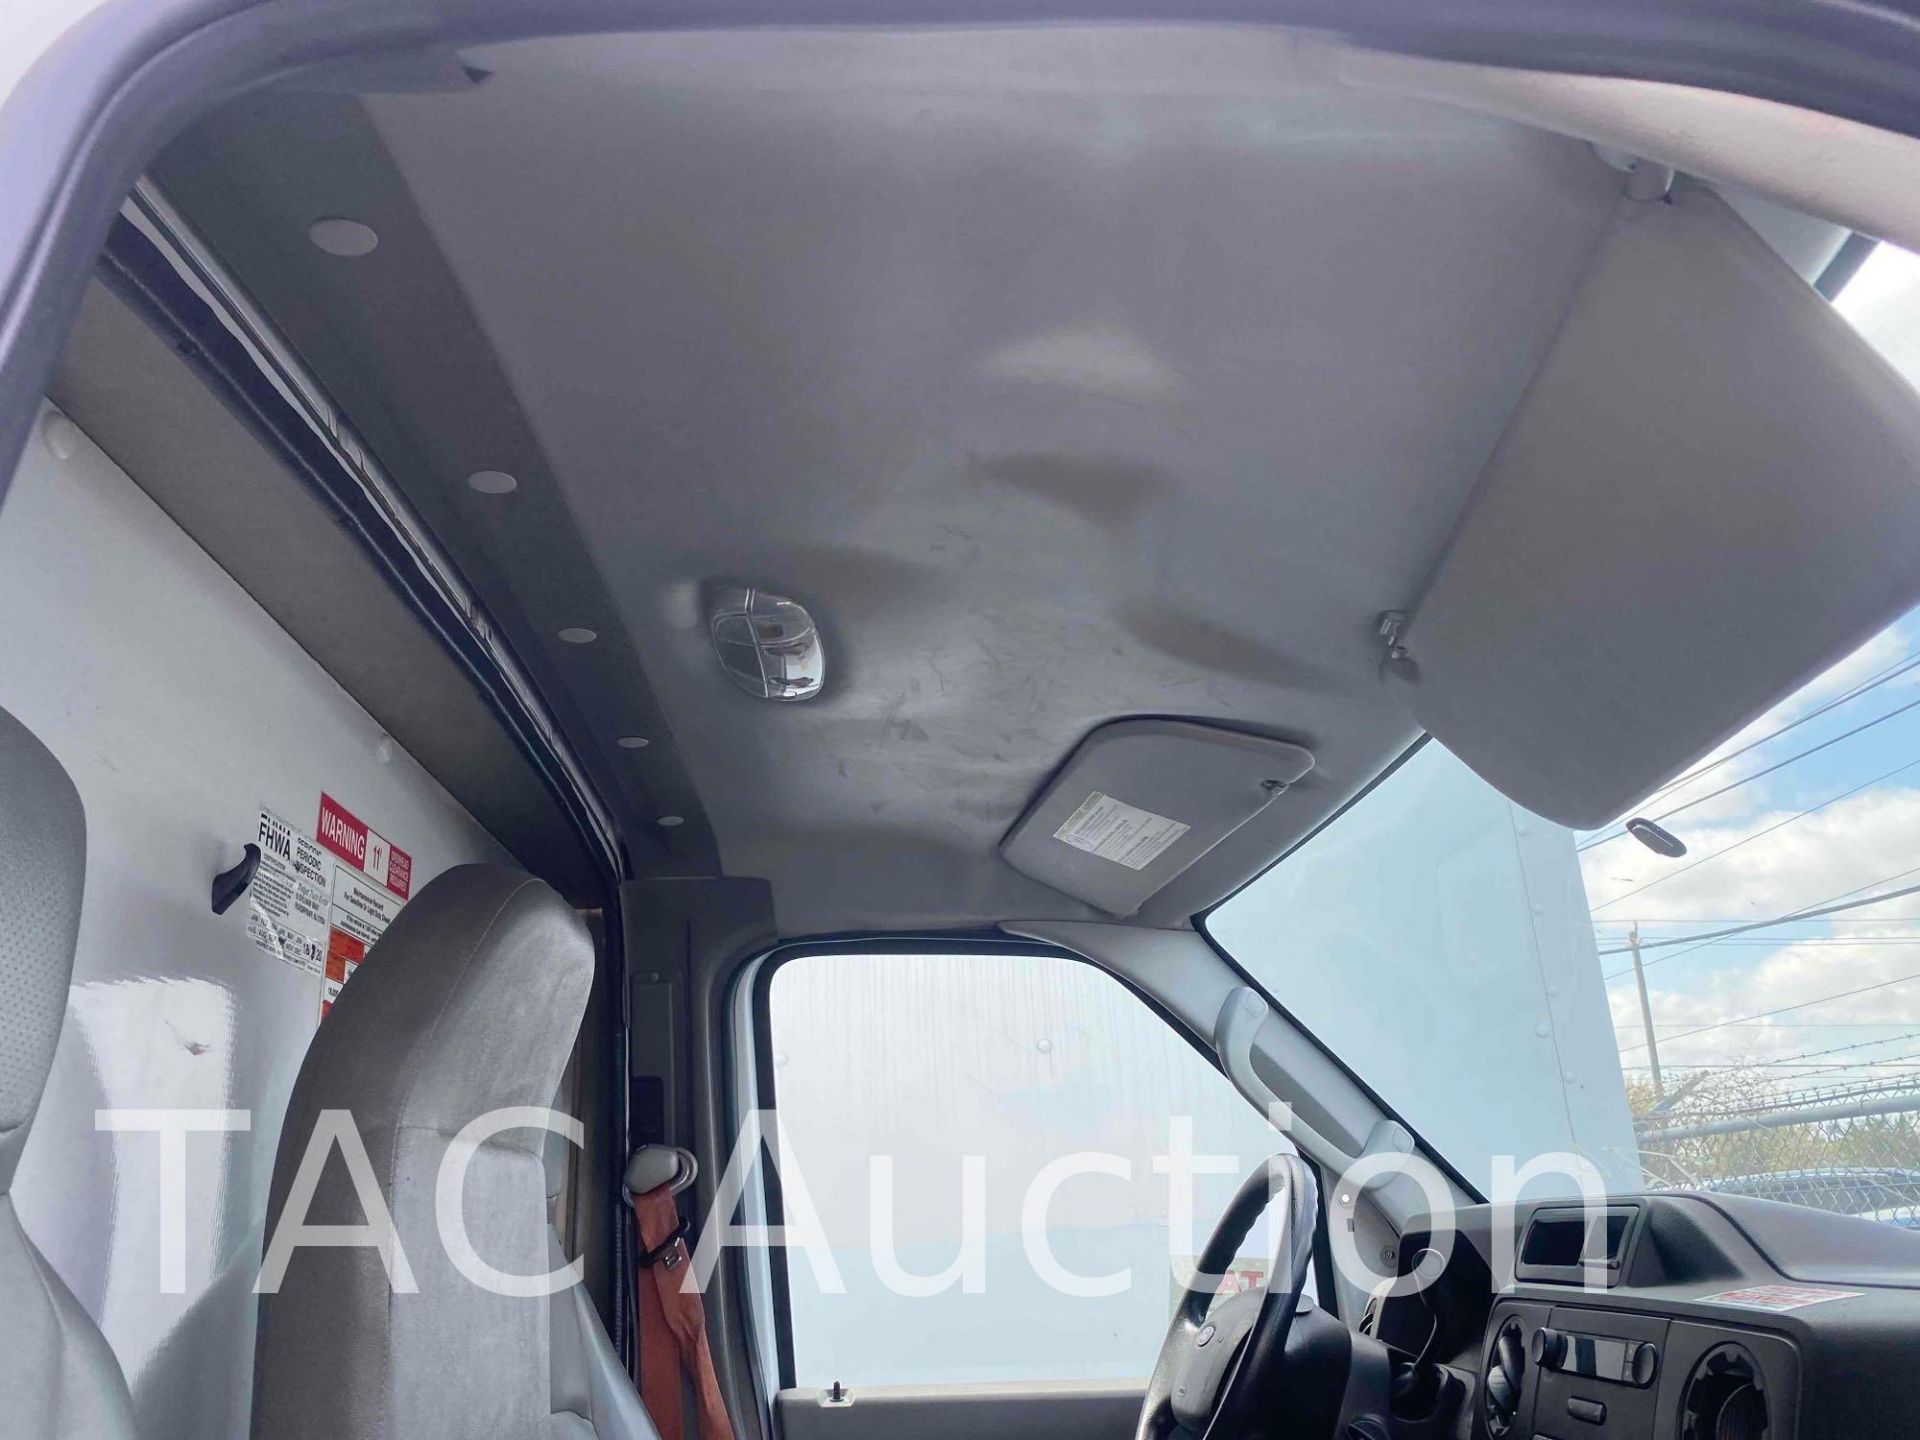 2014 Ford E-350 Box Truck - Image 17 of 41